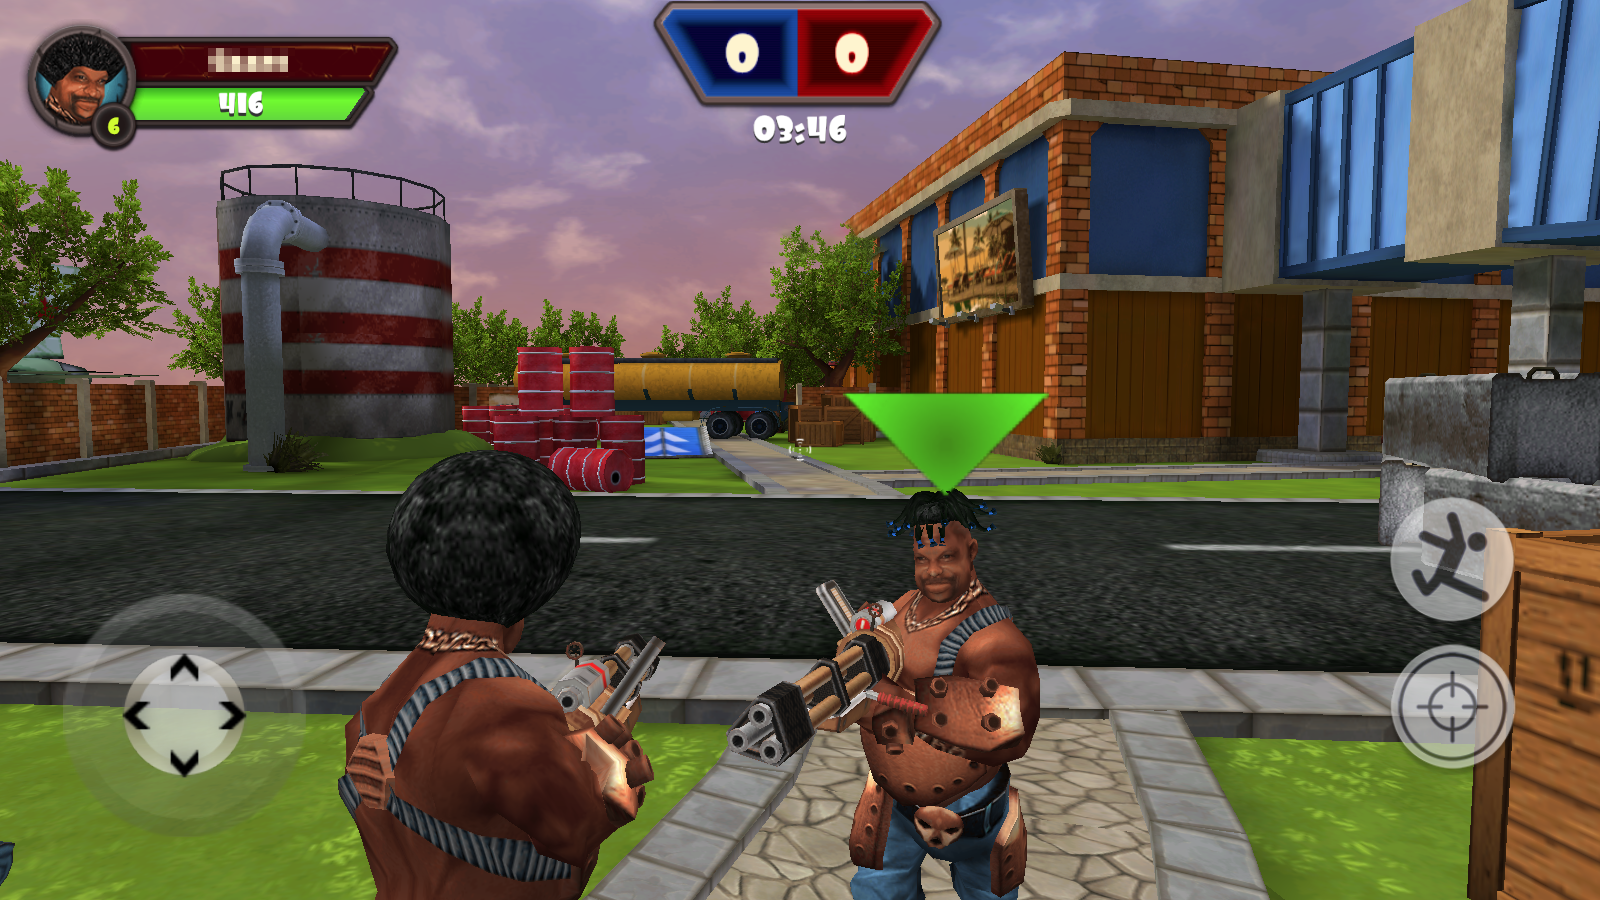 AIRPORT CLASH 3D - Play Online for Free!